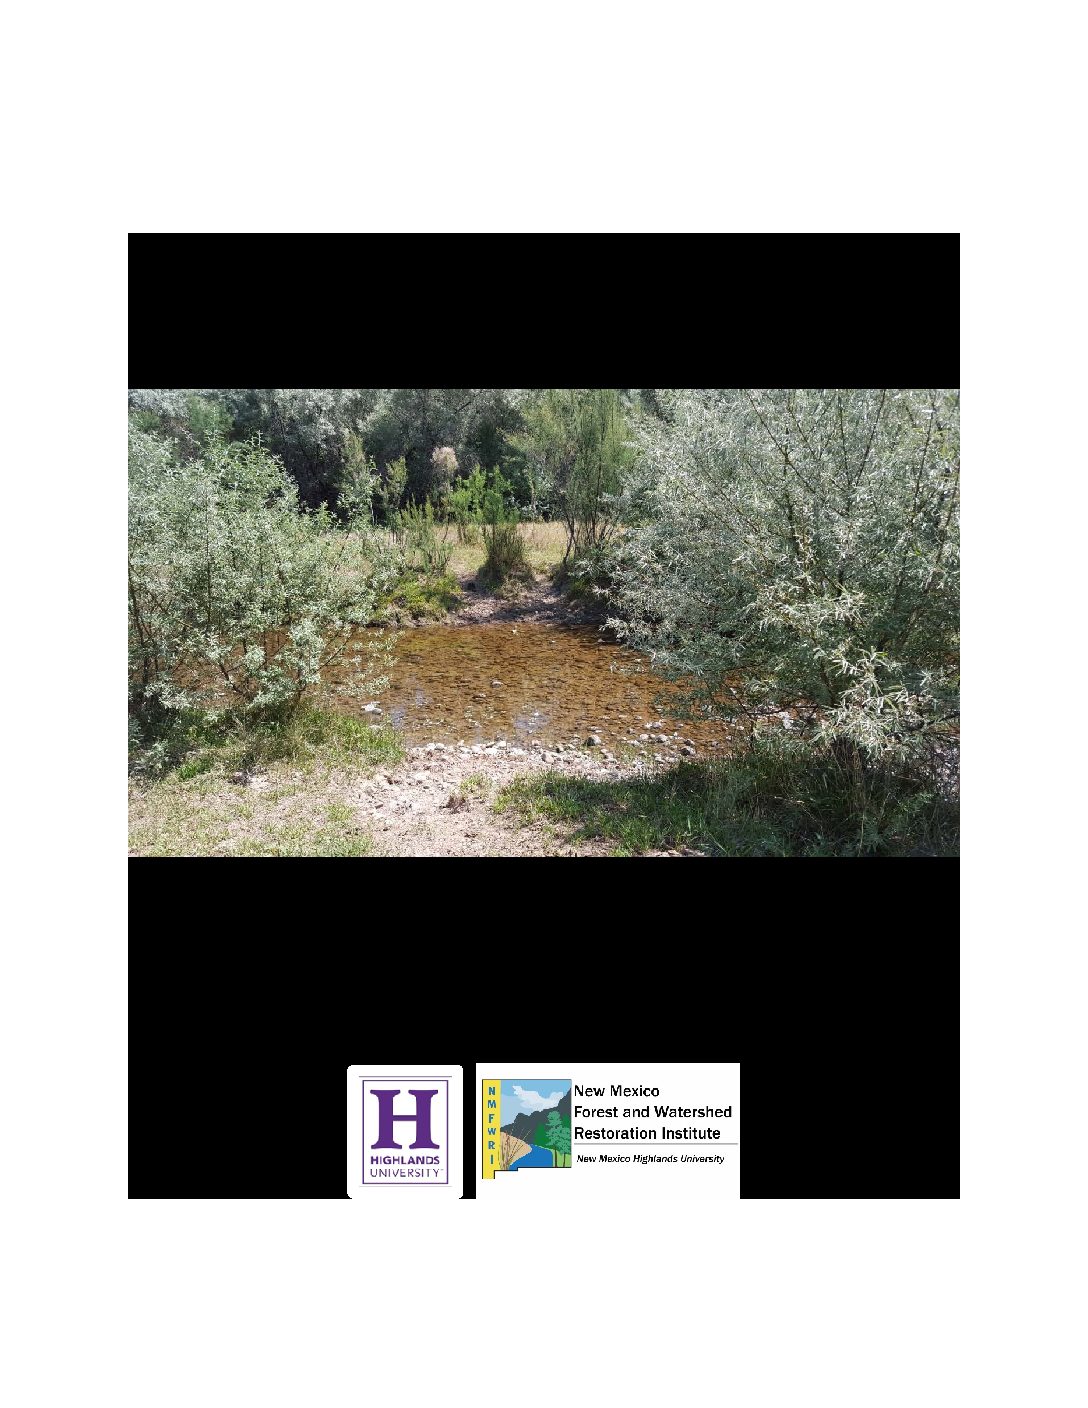 Literature Review of Four Invasive Phreatophytes and One Invasive Grass within the Bosque Forest of the Middle Rio Grande